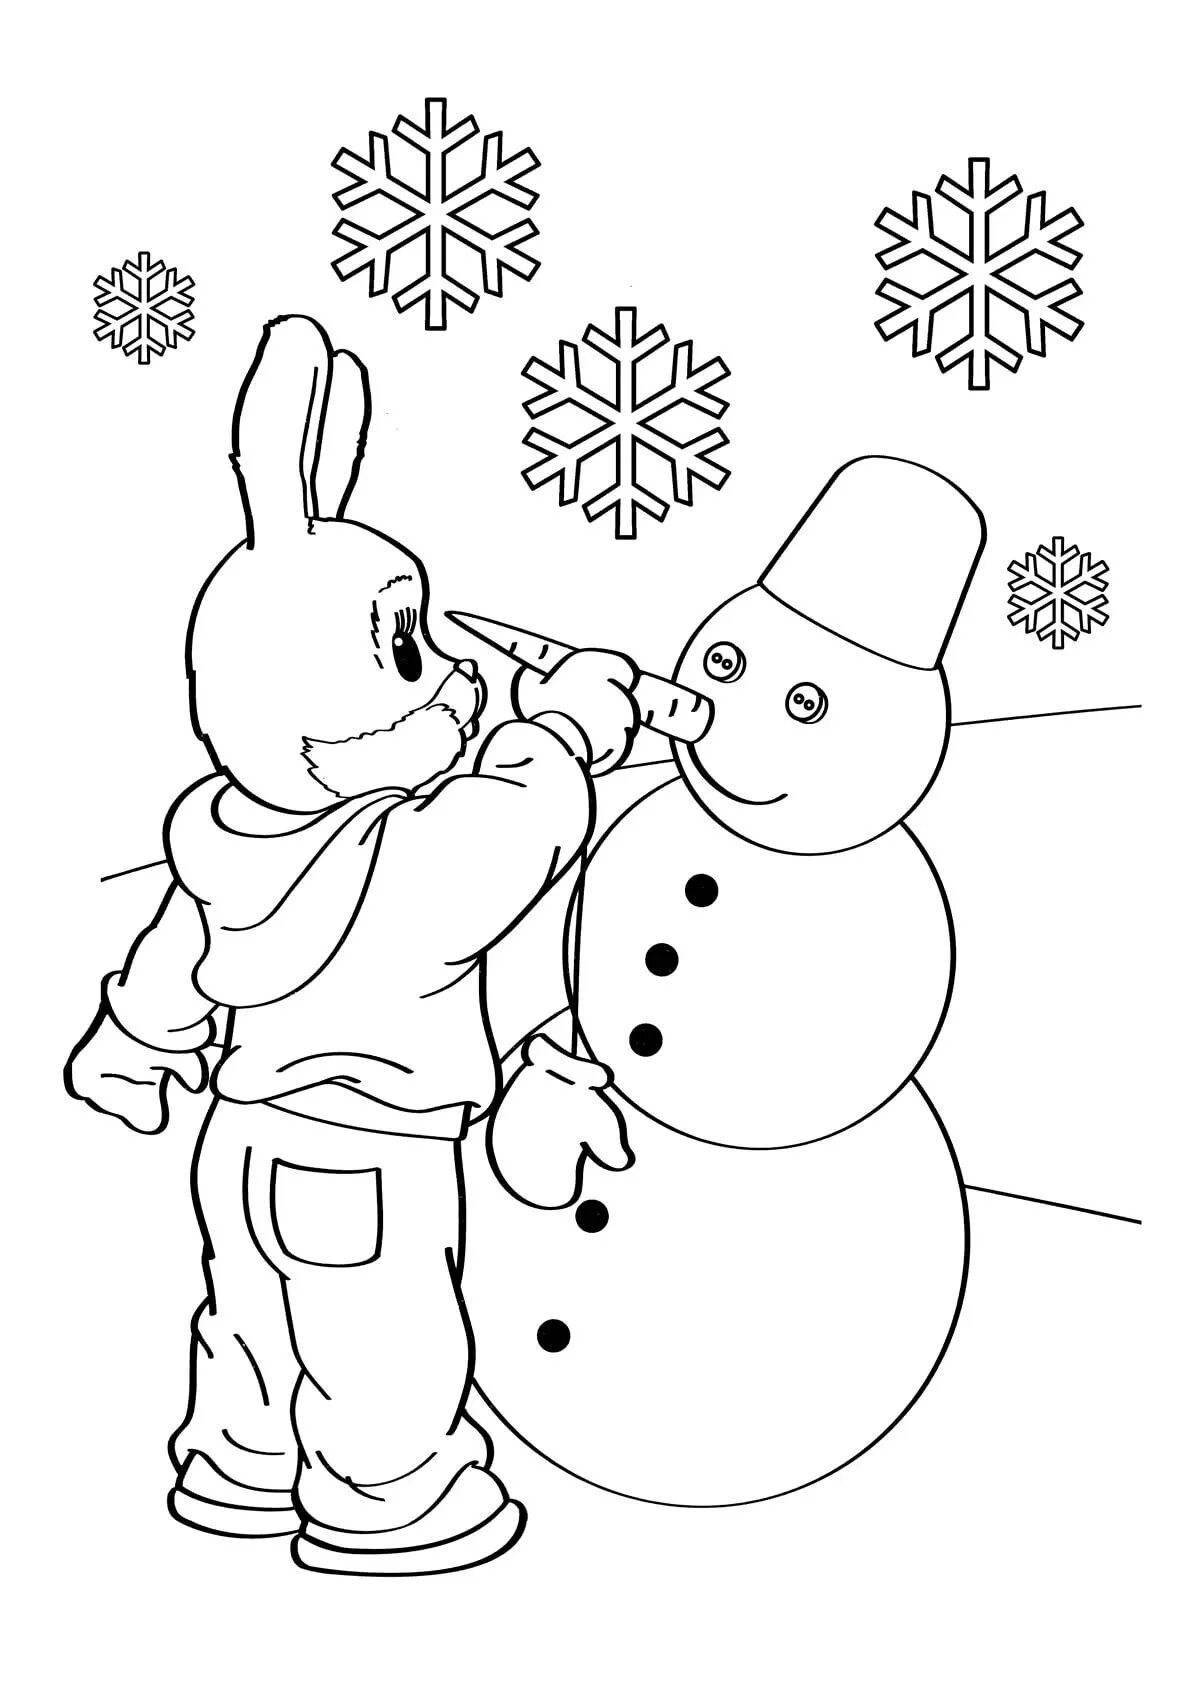 Merry winter coloring for kids